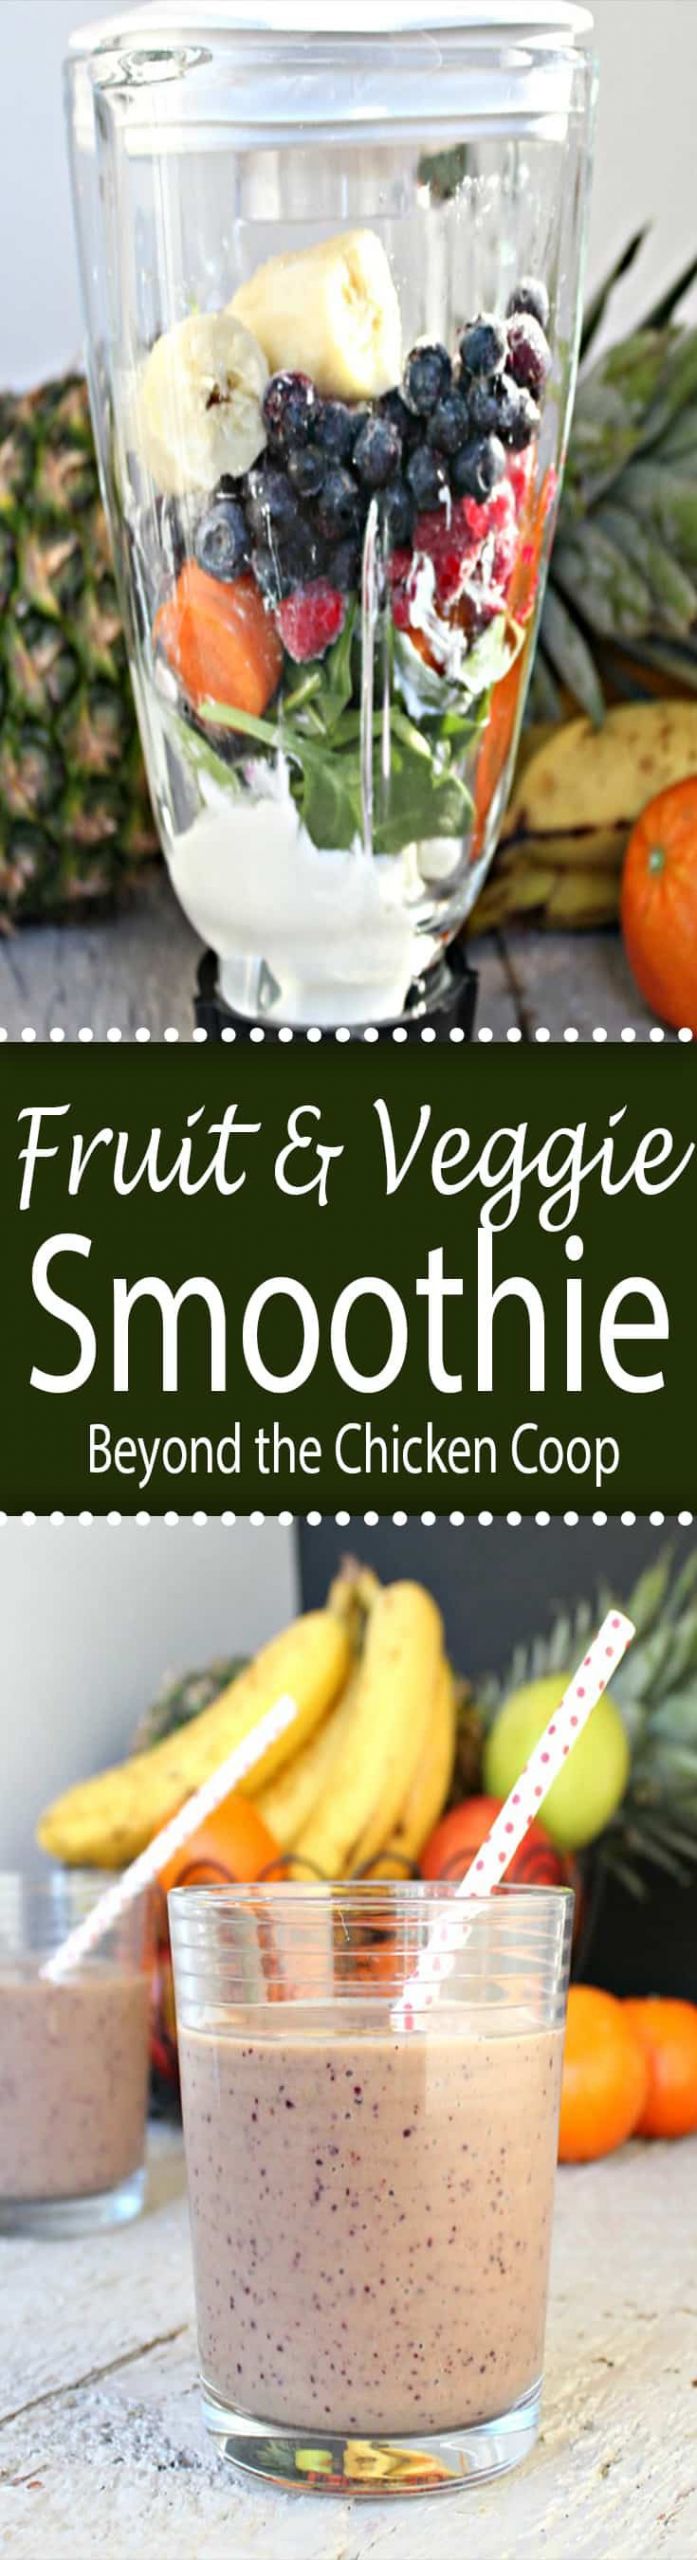 Veg And Fruit Smoothies
 Smoothie with Fruit and Veggies Beyond The Chicken Coop